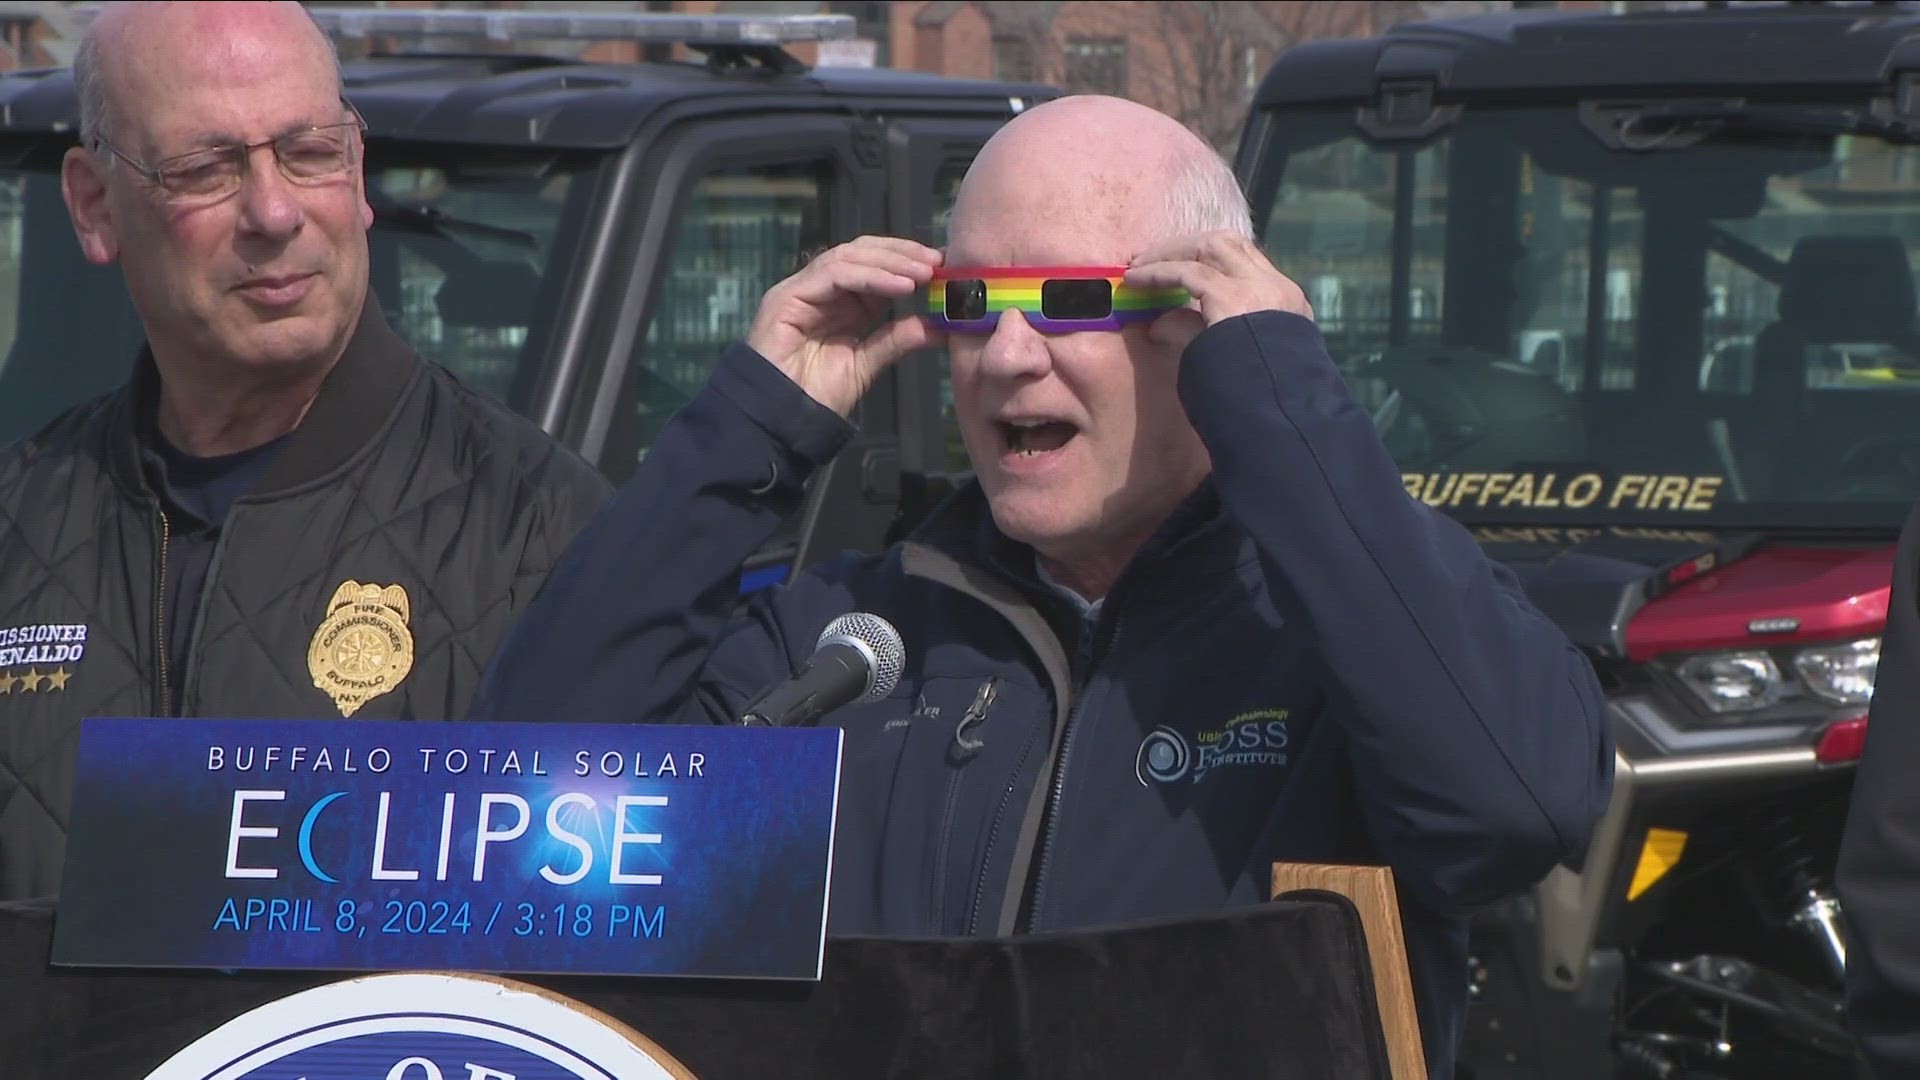 City of Buffalo prepares for eclipse visitors